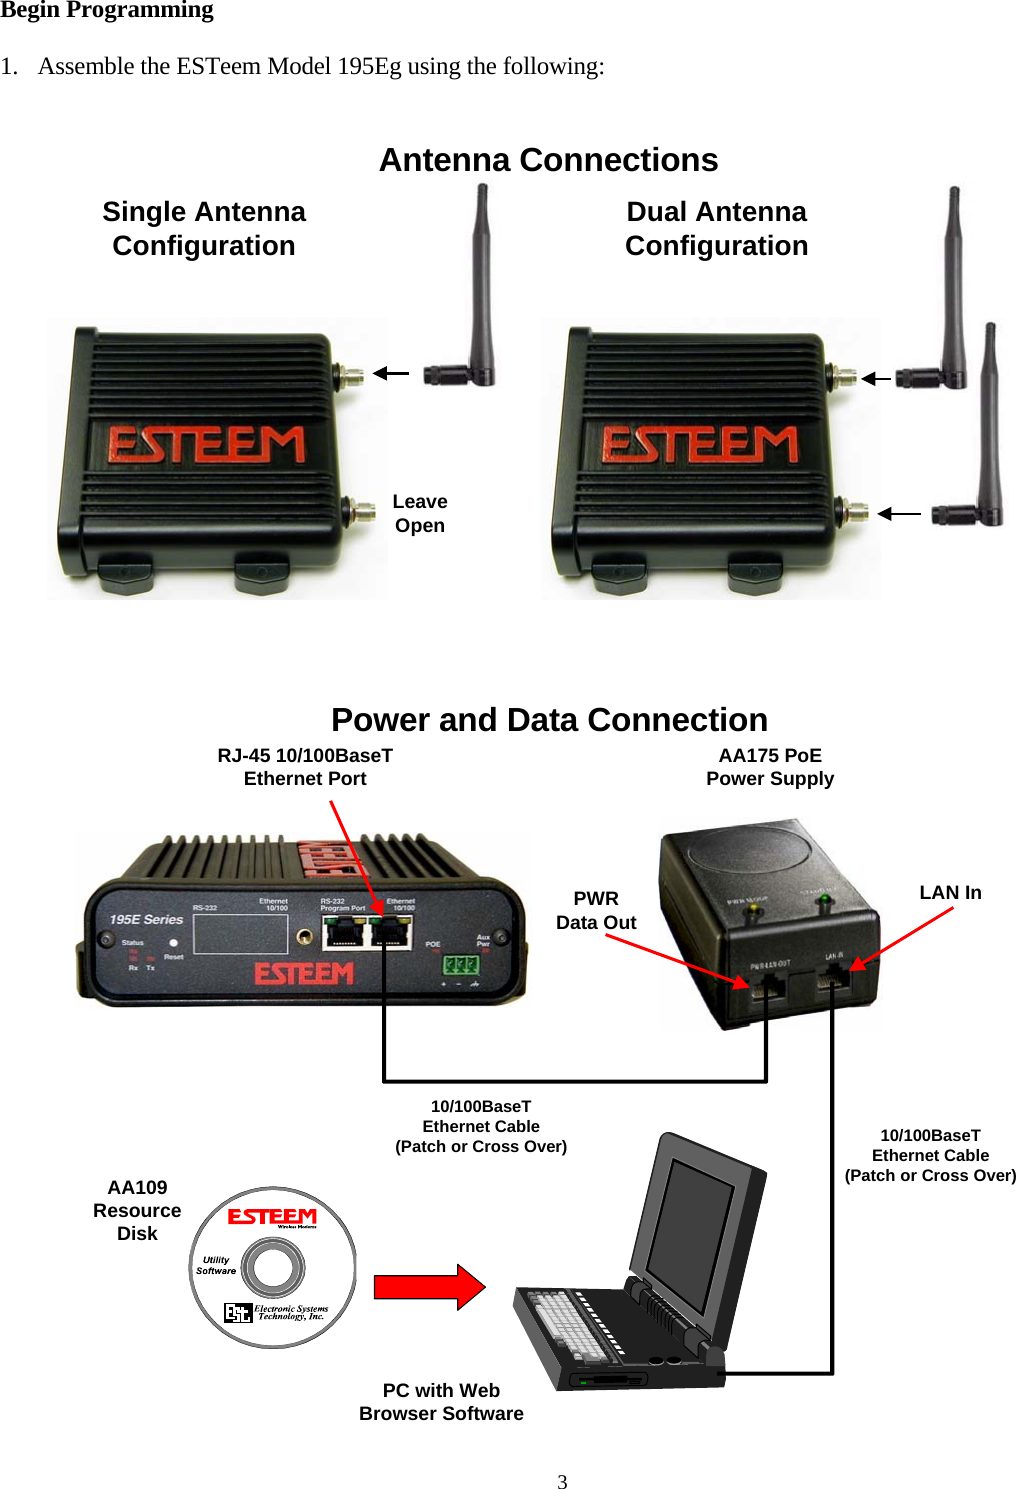 Begin Programming  1. Assemble the ESTeem Model 195Eg using the following:  Antenna Connections LeaveOpenSingle AntennaConfiguration Dual AntennaConfiguration  Power and Data Connection PC with WebBrowser SoftwareRJ-45 10/100BaseTEthernet Port10/100BaseTEthernet Cable(Patch or Cross Over)AA175 PoEPower SupplyLAN In10/100BaseTEthernet Cable(Patch or Cross Over)PWRData OutAA109ResourceDisk  3 